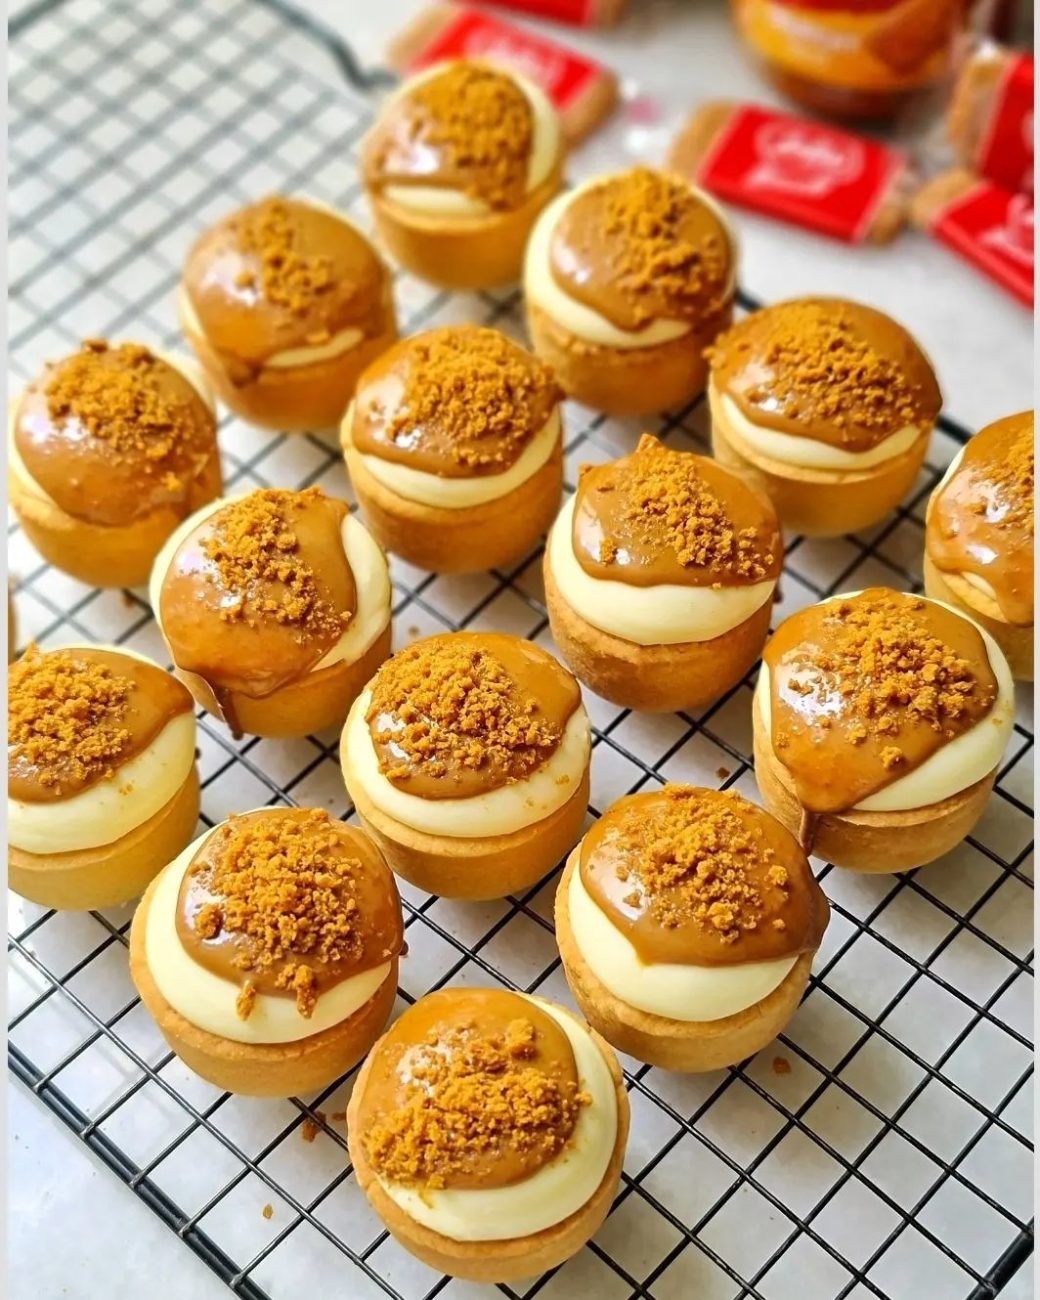 Resep Biscoff Cheese Tart RB Style